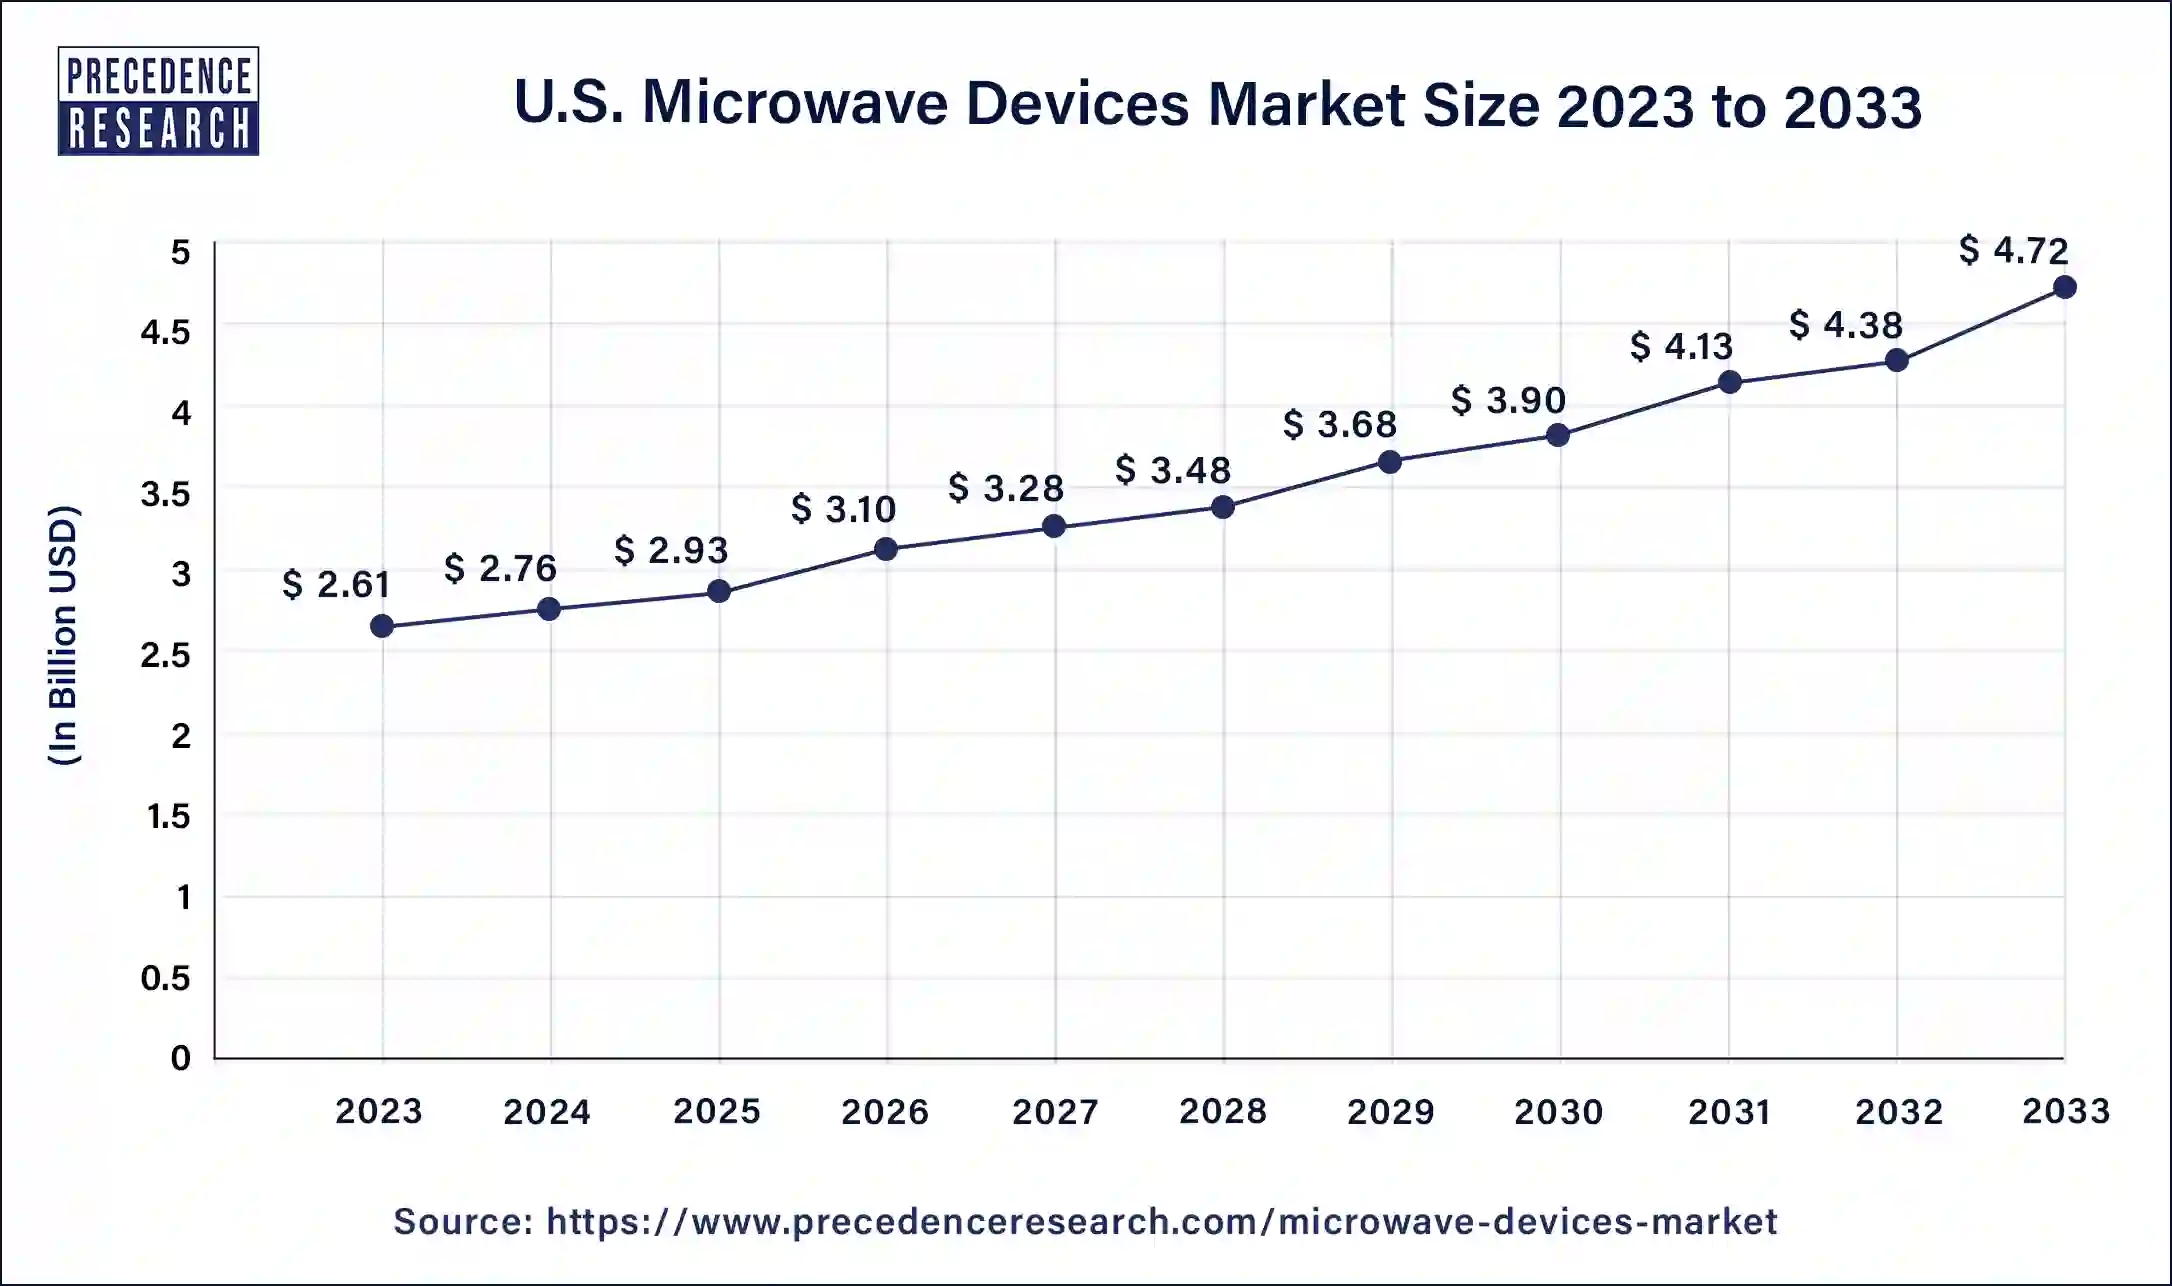 U.S. Microwave Devices Market Size 2024 to 2033